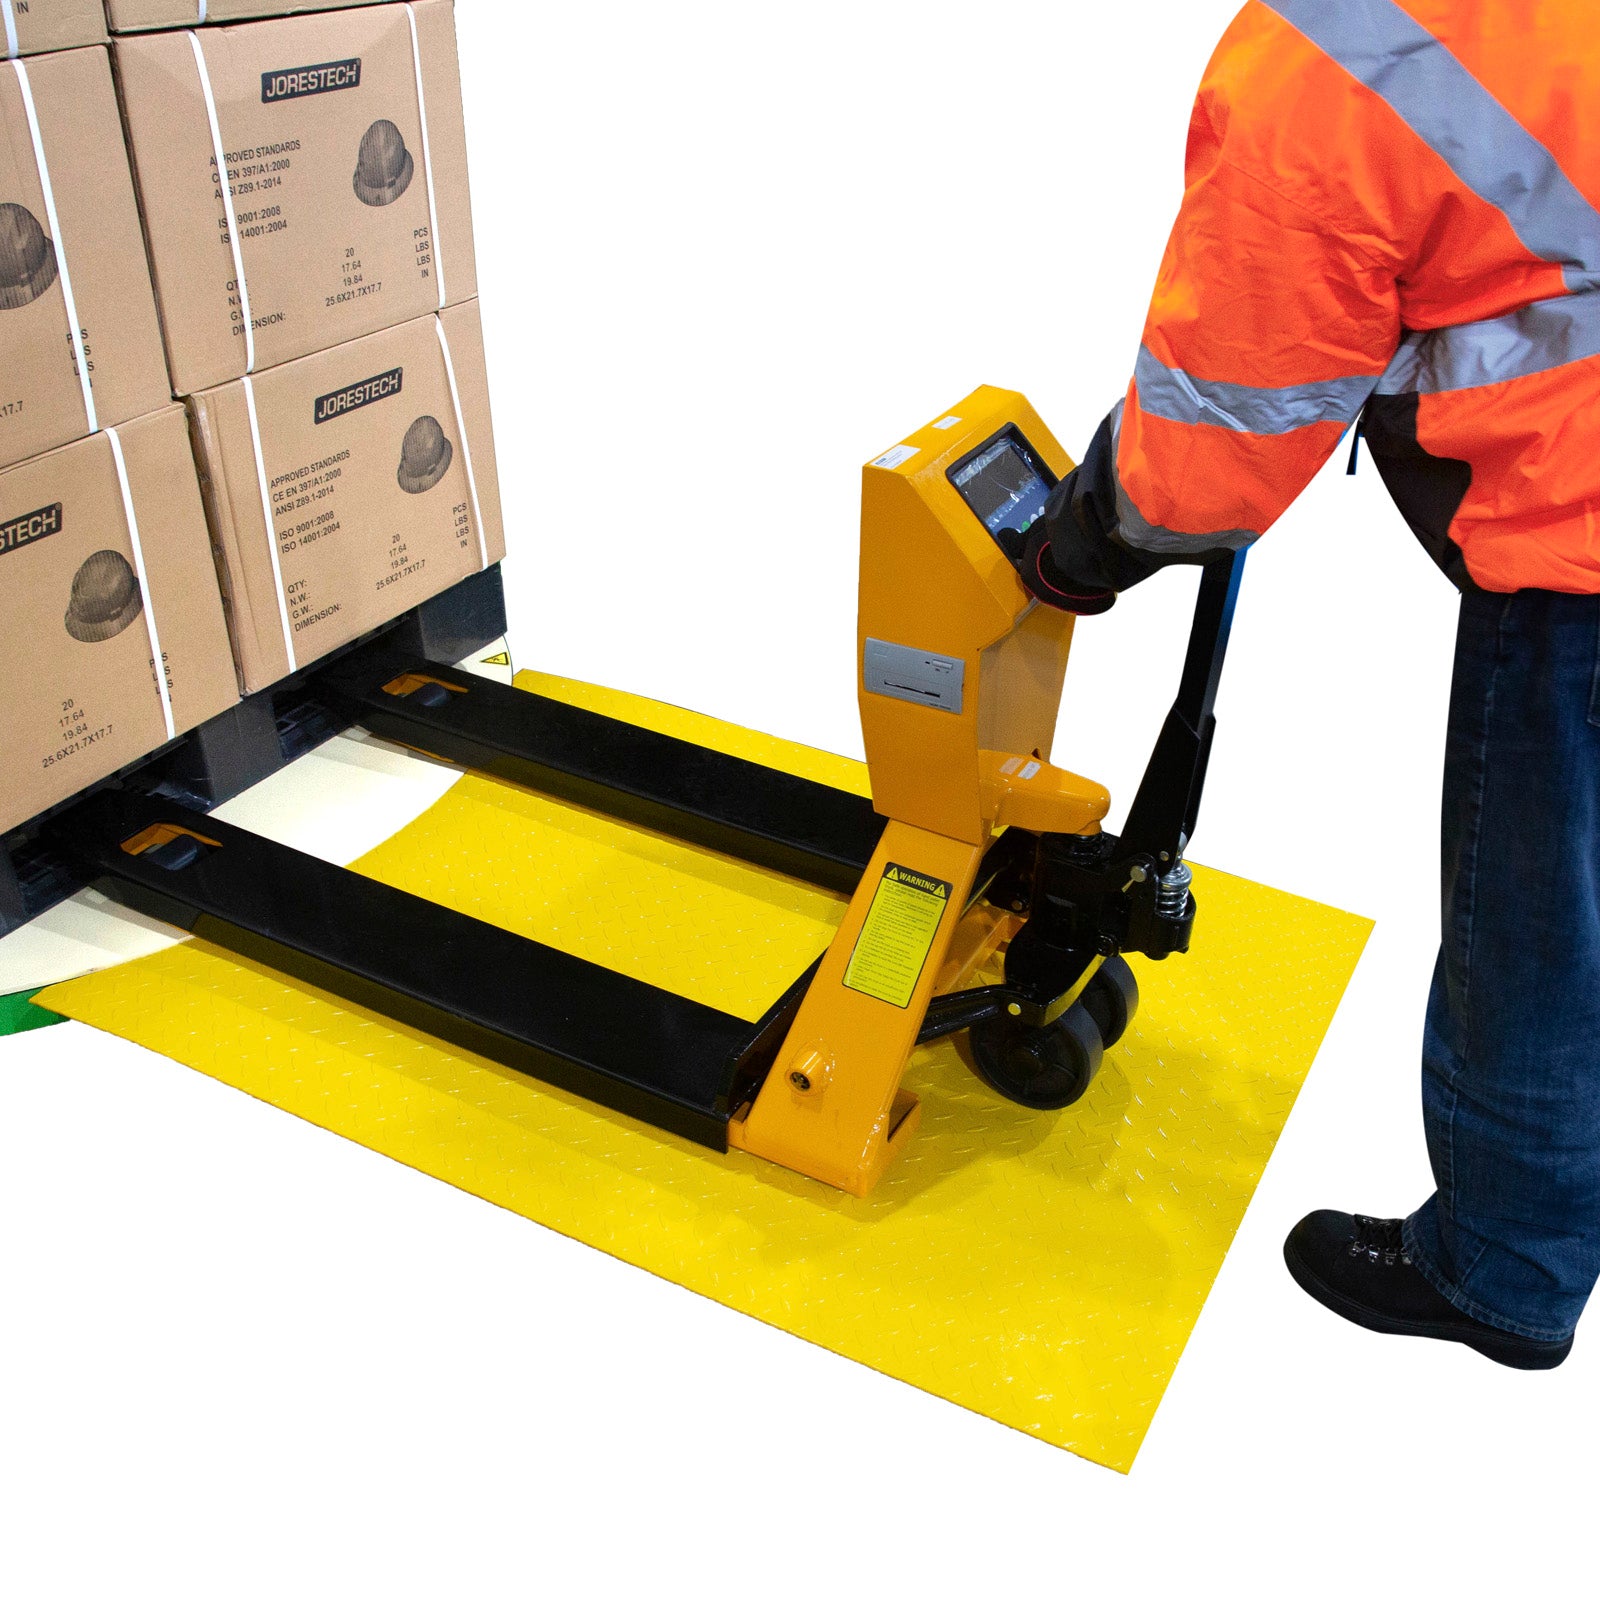  Man wearing a high-vis orange jacket pushing a pallet jack loaded with boxes through the loading ramp and onto the stretch wrapper.